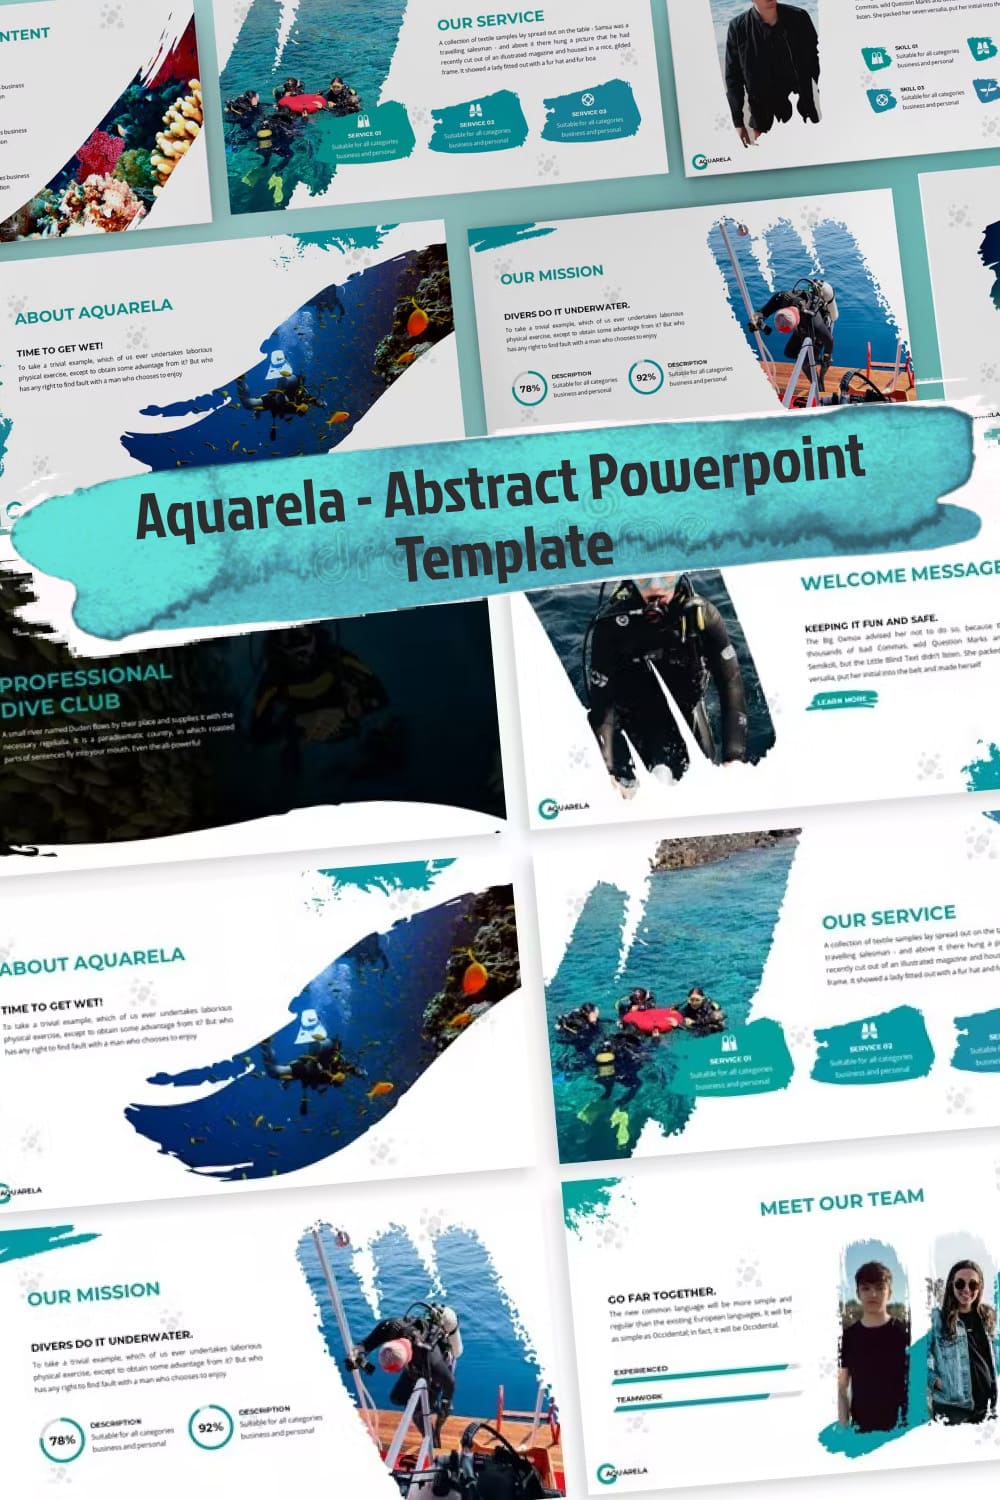 Aquarela abstract powerpoint template - pinterest image preview.